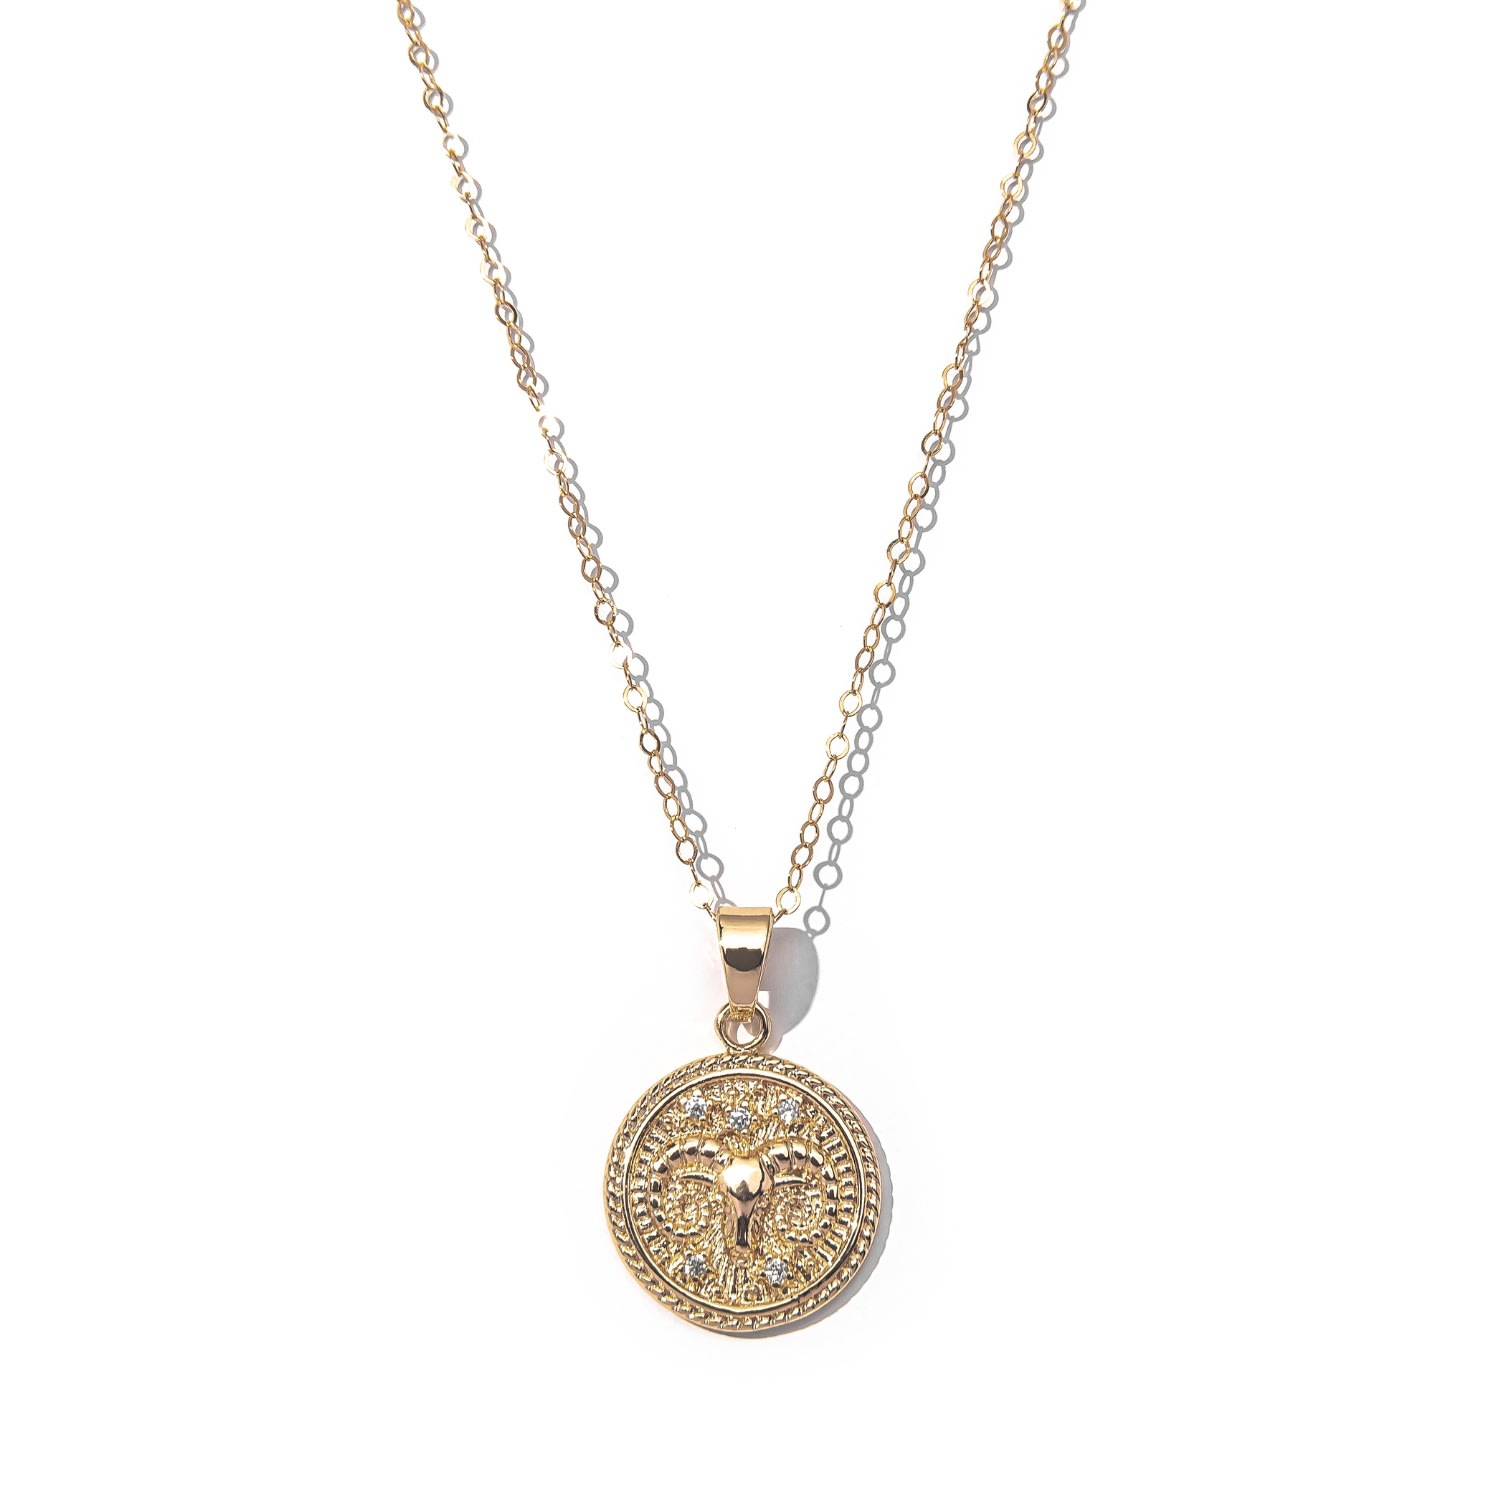 Women's Aries Zodiac Medallion Pendant Gold Filled Necklace The Essential Jewels